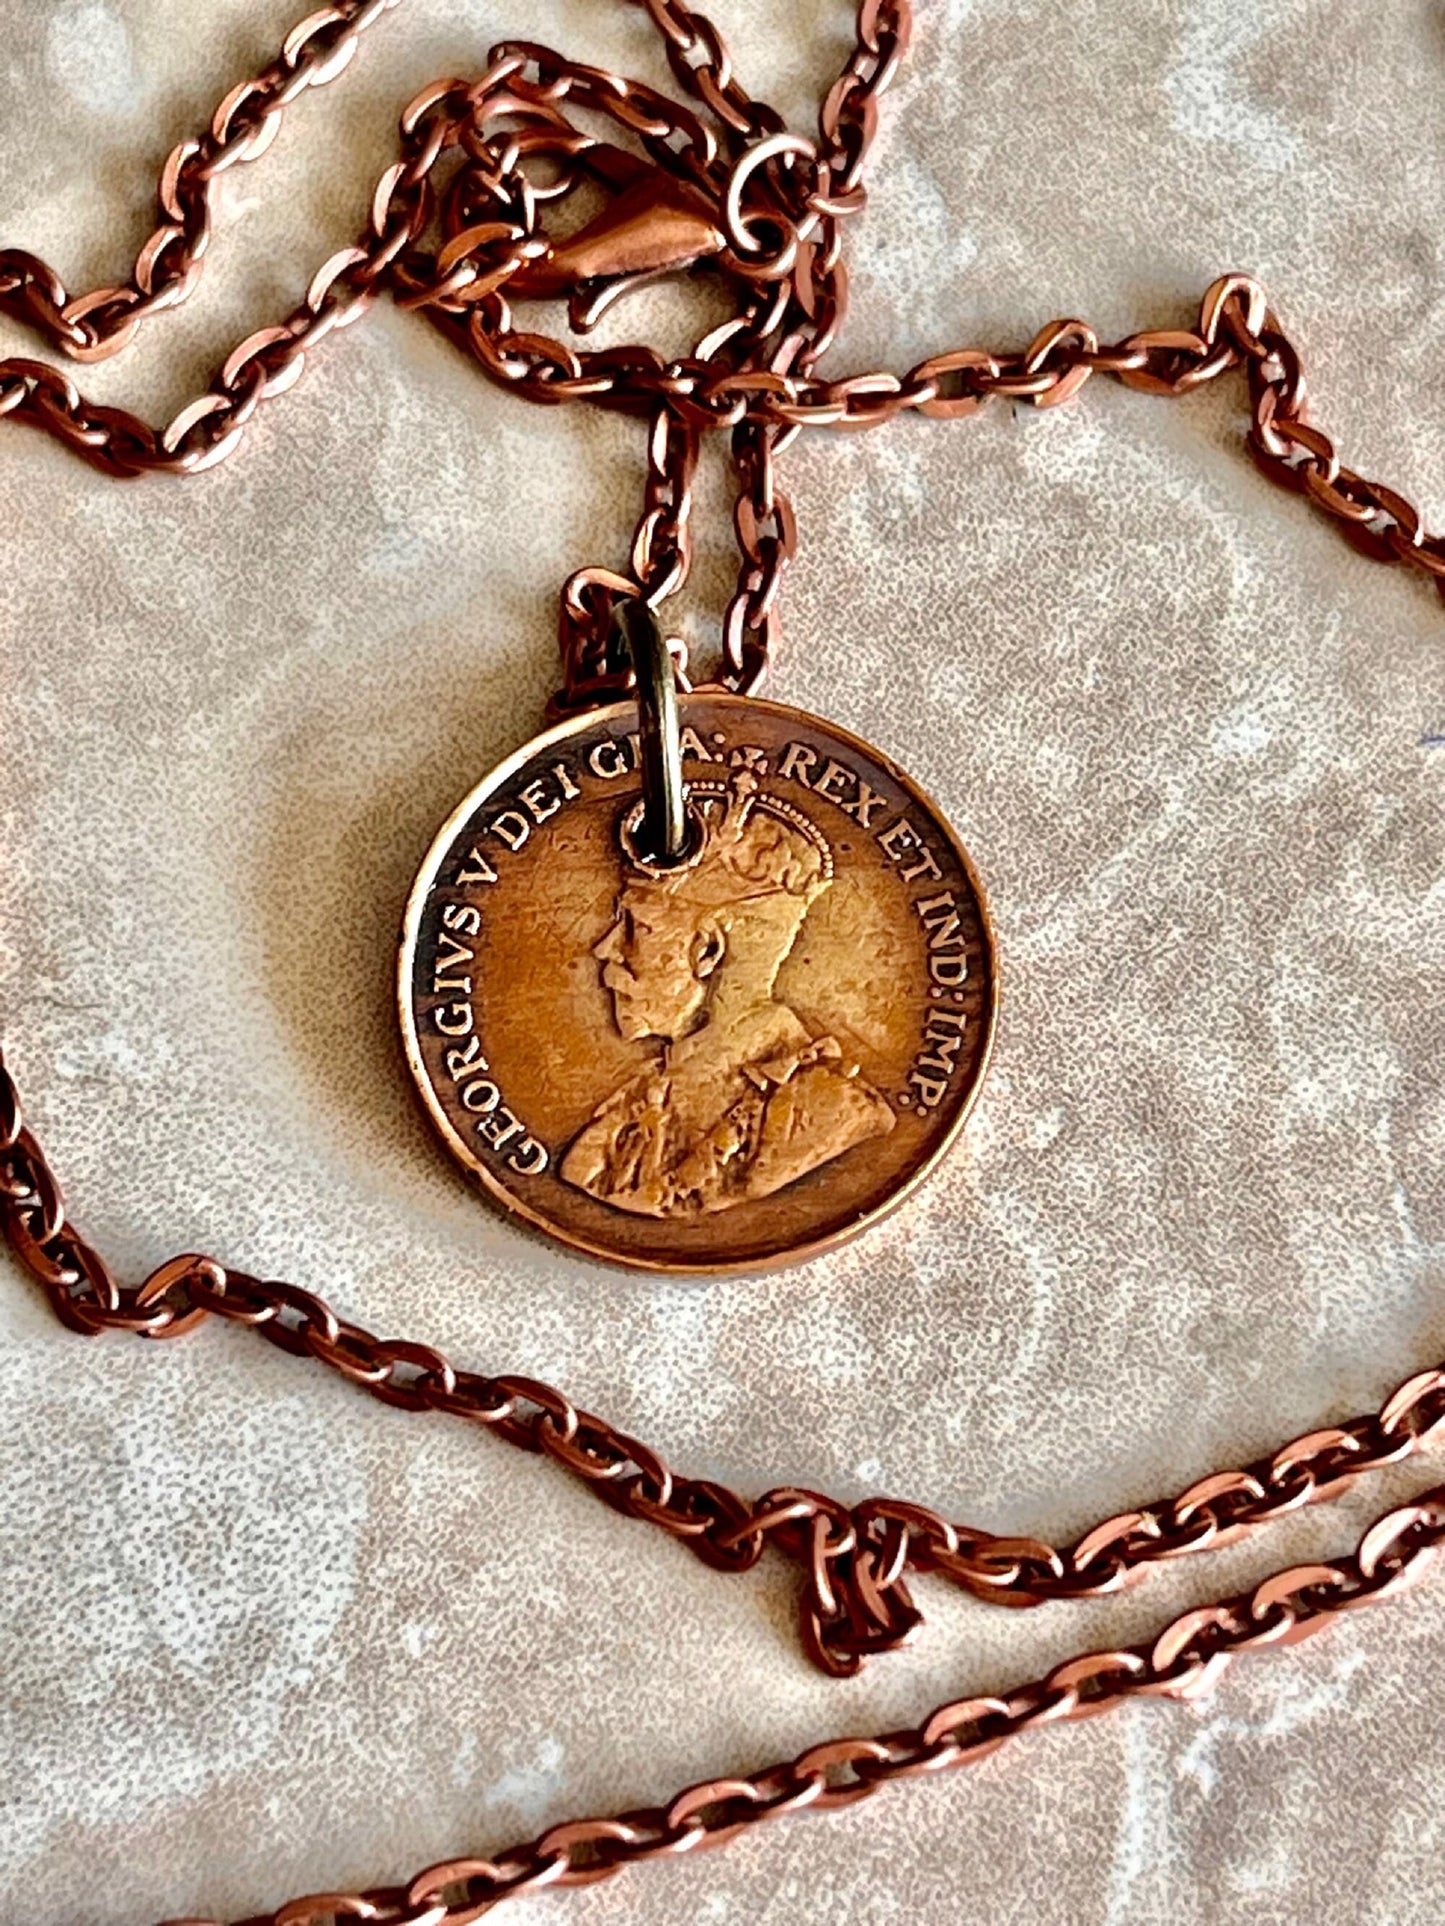 Canadian Penny Coin Pendant Coin One Cent Necklace Handmade Jewelry Gift For Friend Coin Charm Gift For Him, Her, World Coins Collector